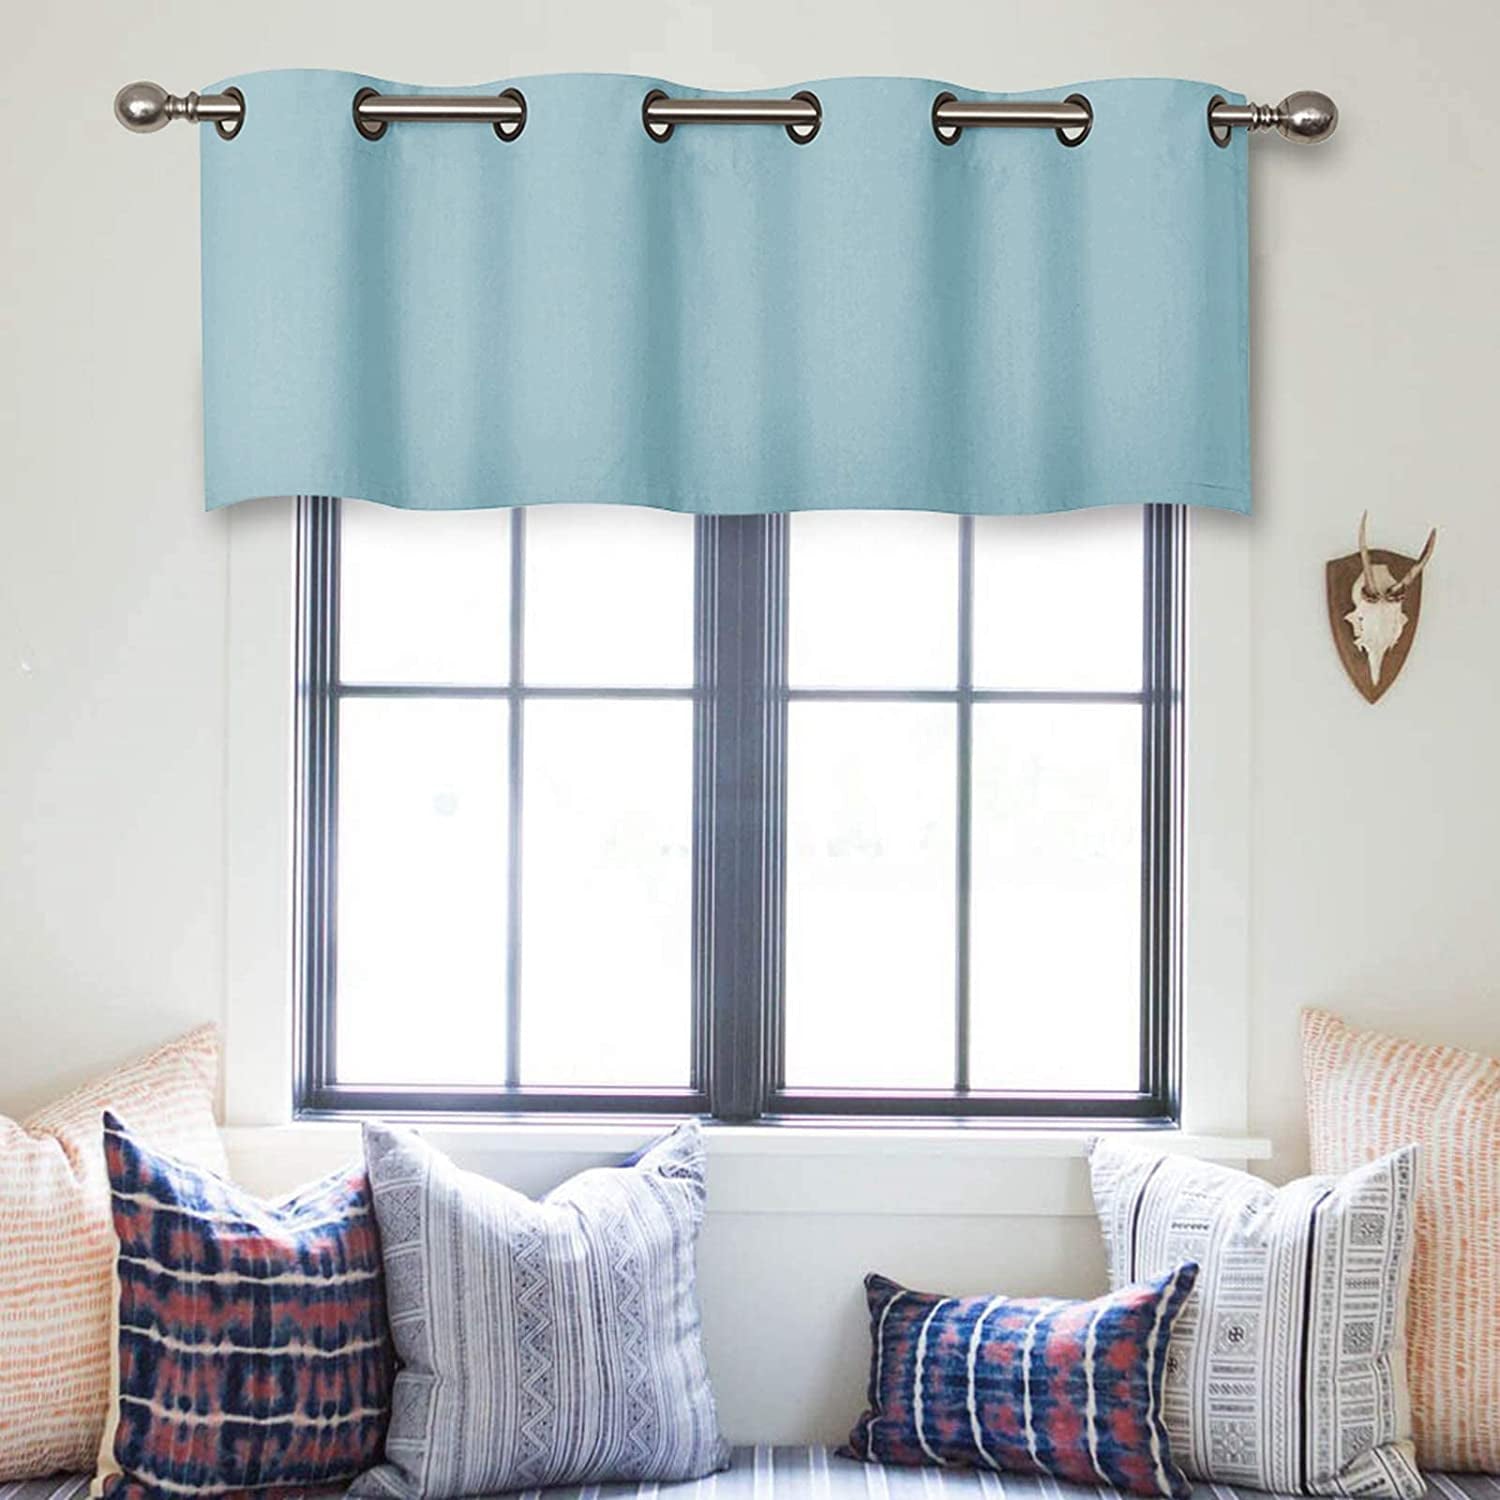 Small Window Grommet Curtains Blackout Curtain Valance Window Treatment for Bedroom, Living Room, Bathroom, Kitchen (One Panel, 42" W x 8" L) Light Blue Solid